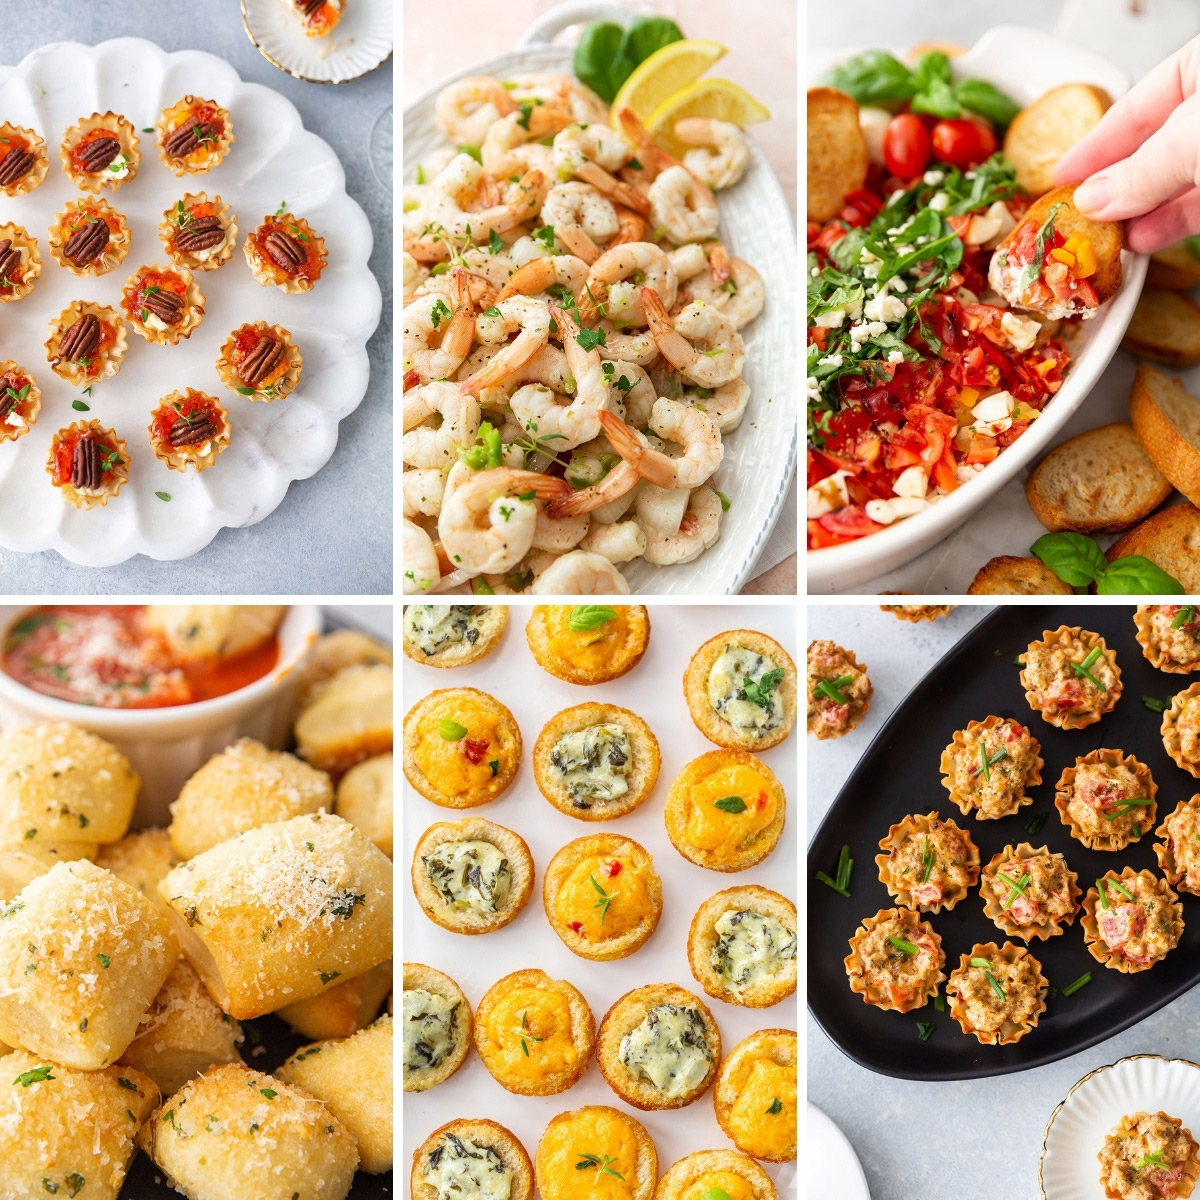 What is the difference between appetizers and hors d’oeuvres?